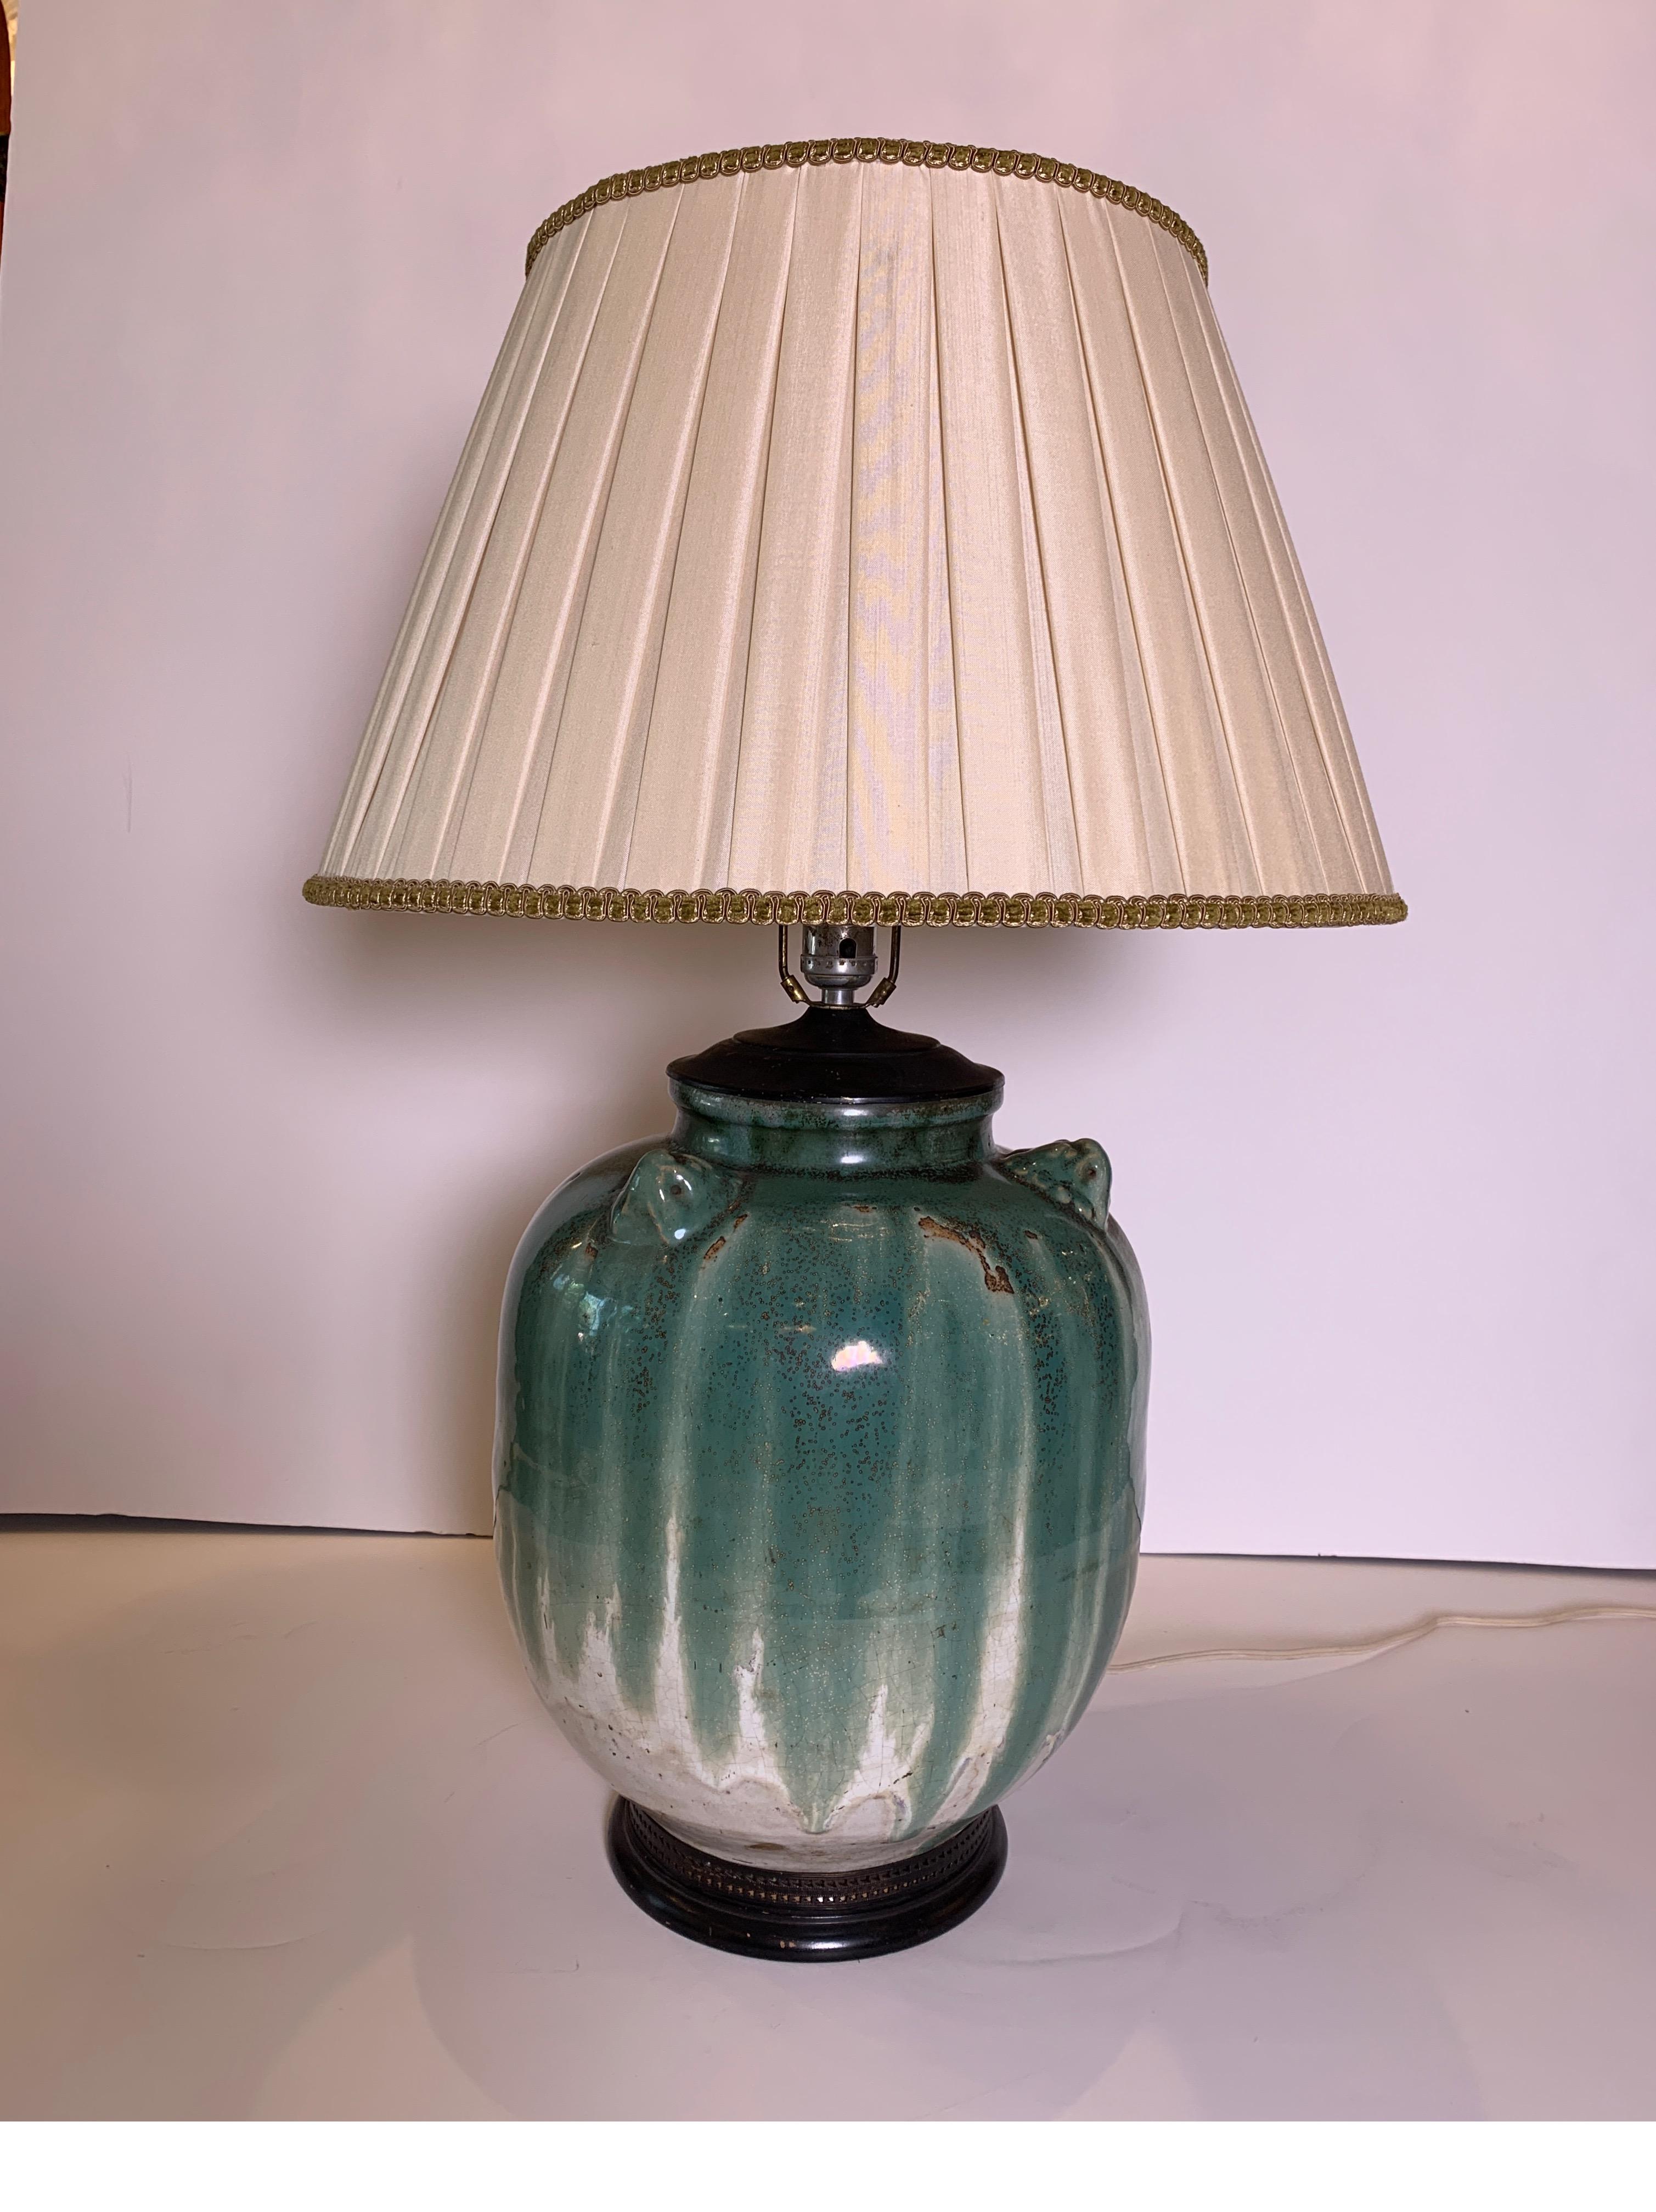 Early 20th century Asian pottery vase table lamp
Nice shape and scale with a beautiful glaze
Dimensions: 11.5